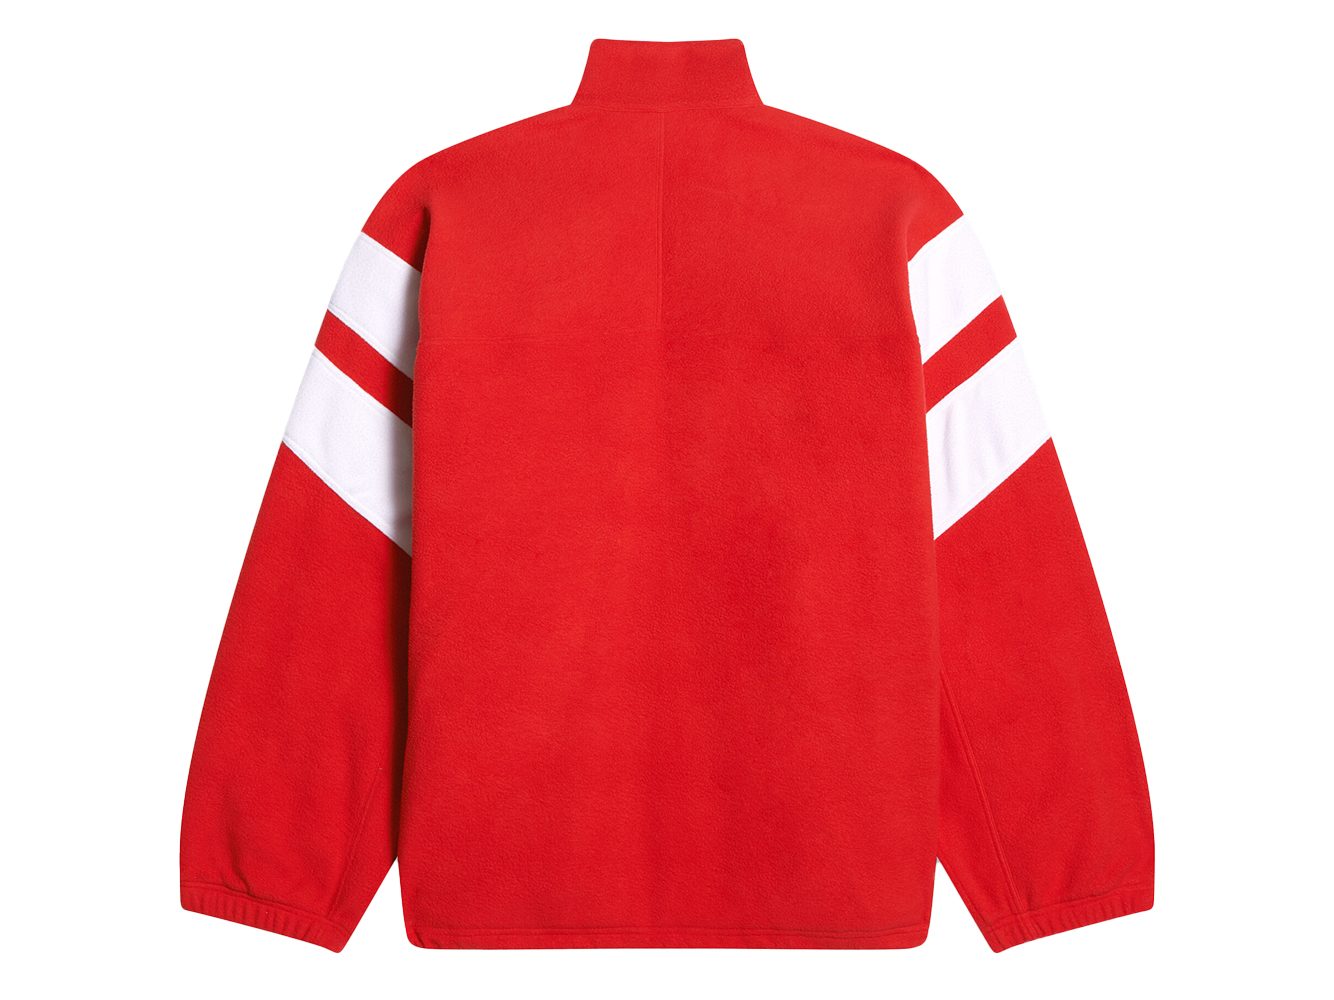 Balenciaga Sporty B Cosy Tracksuit Large Fit Jacket Red/Black/White